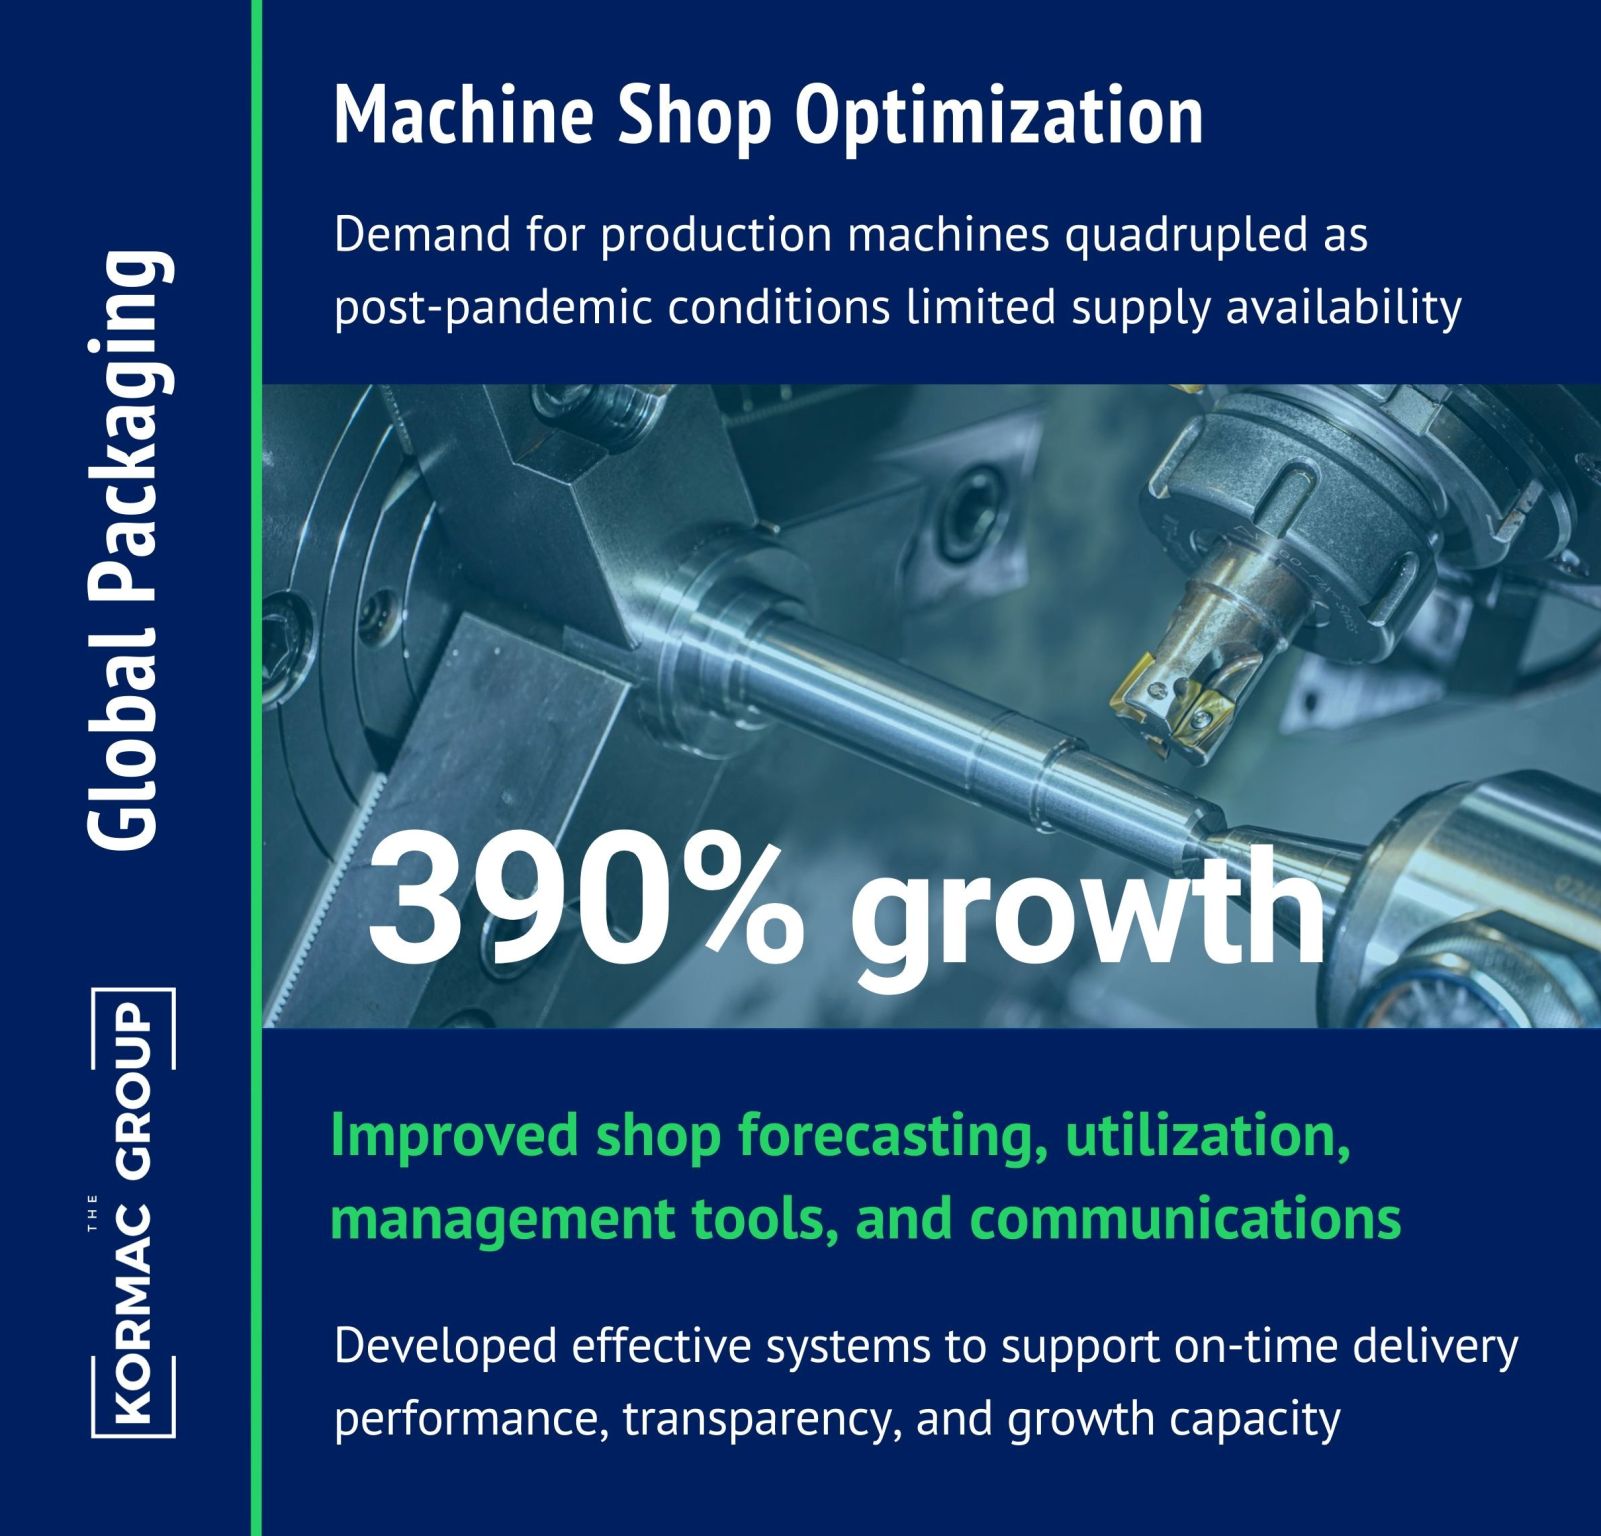 Global Packaging Machine Shop Optimization Demand for production machines quadrupled as post-pandemic conditions limited supply availability. 390% growth Improved shop floor forecasting, utilization, management tools, and communications Developed effective systems to support on-time delivery performance, transparency, and growth capacity.